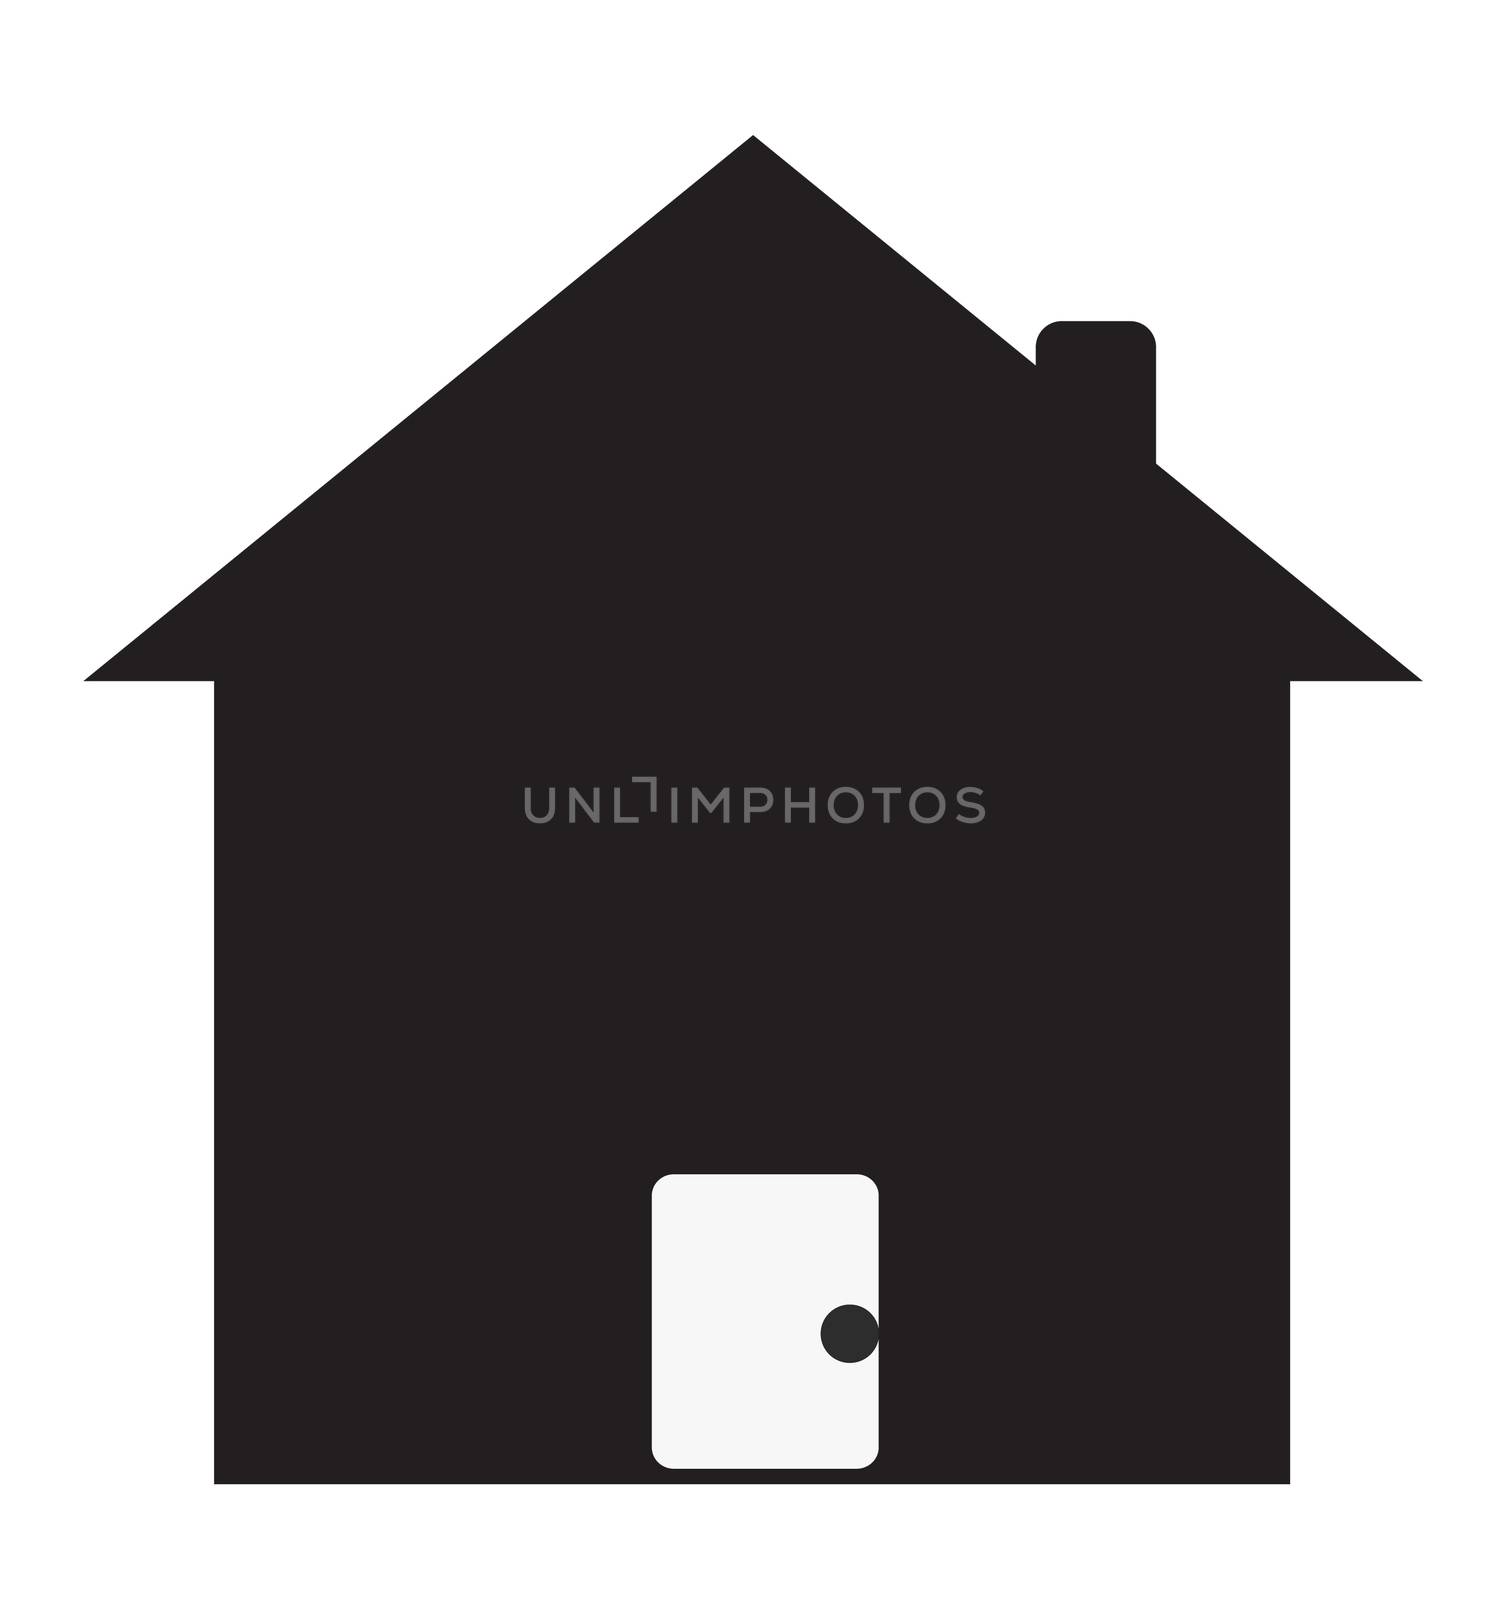 home icon on white background. flat style. house icon for your web site design, logo, app, UI. black home symbol.